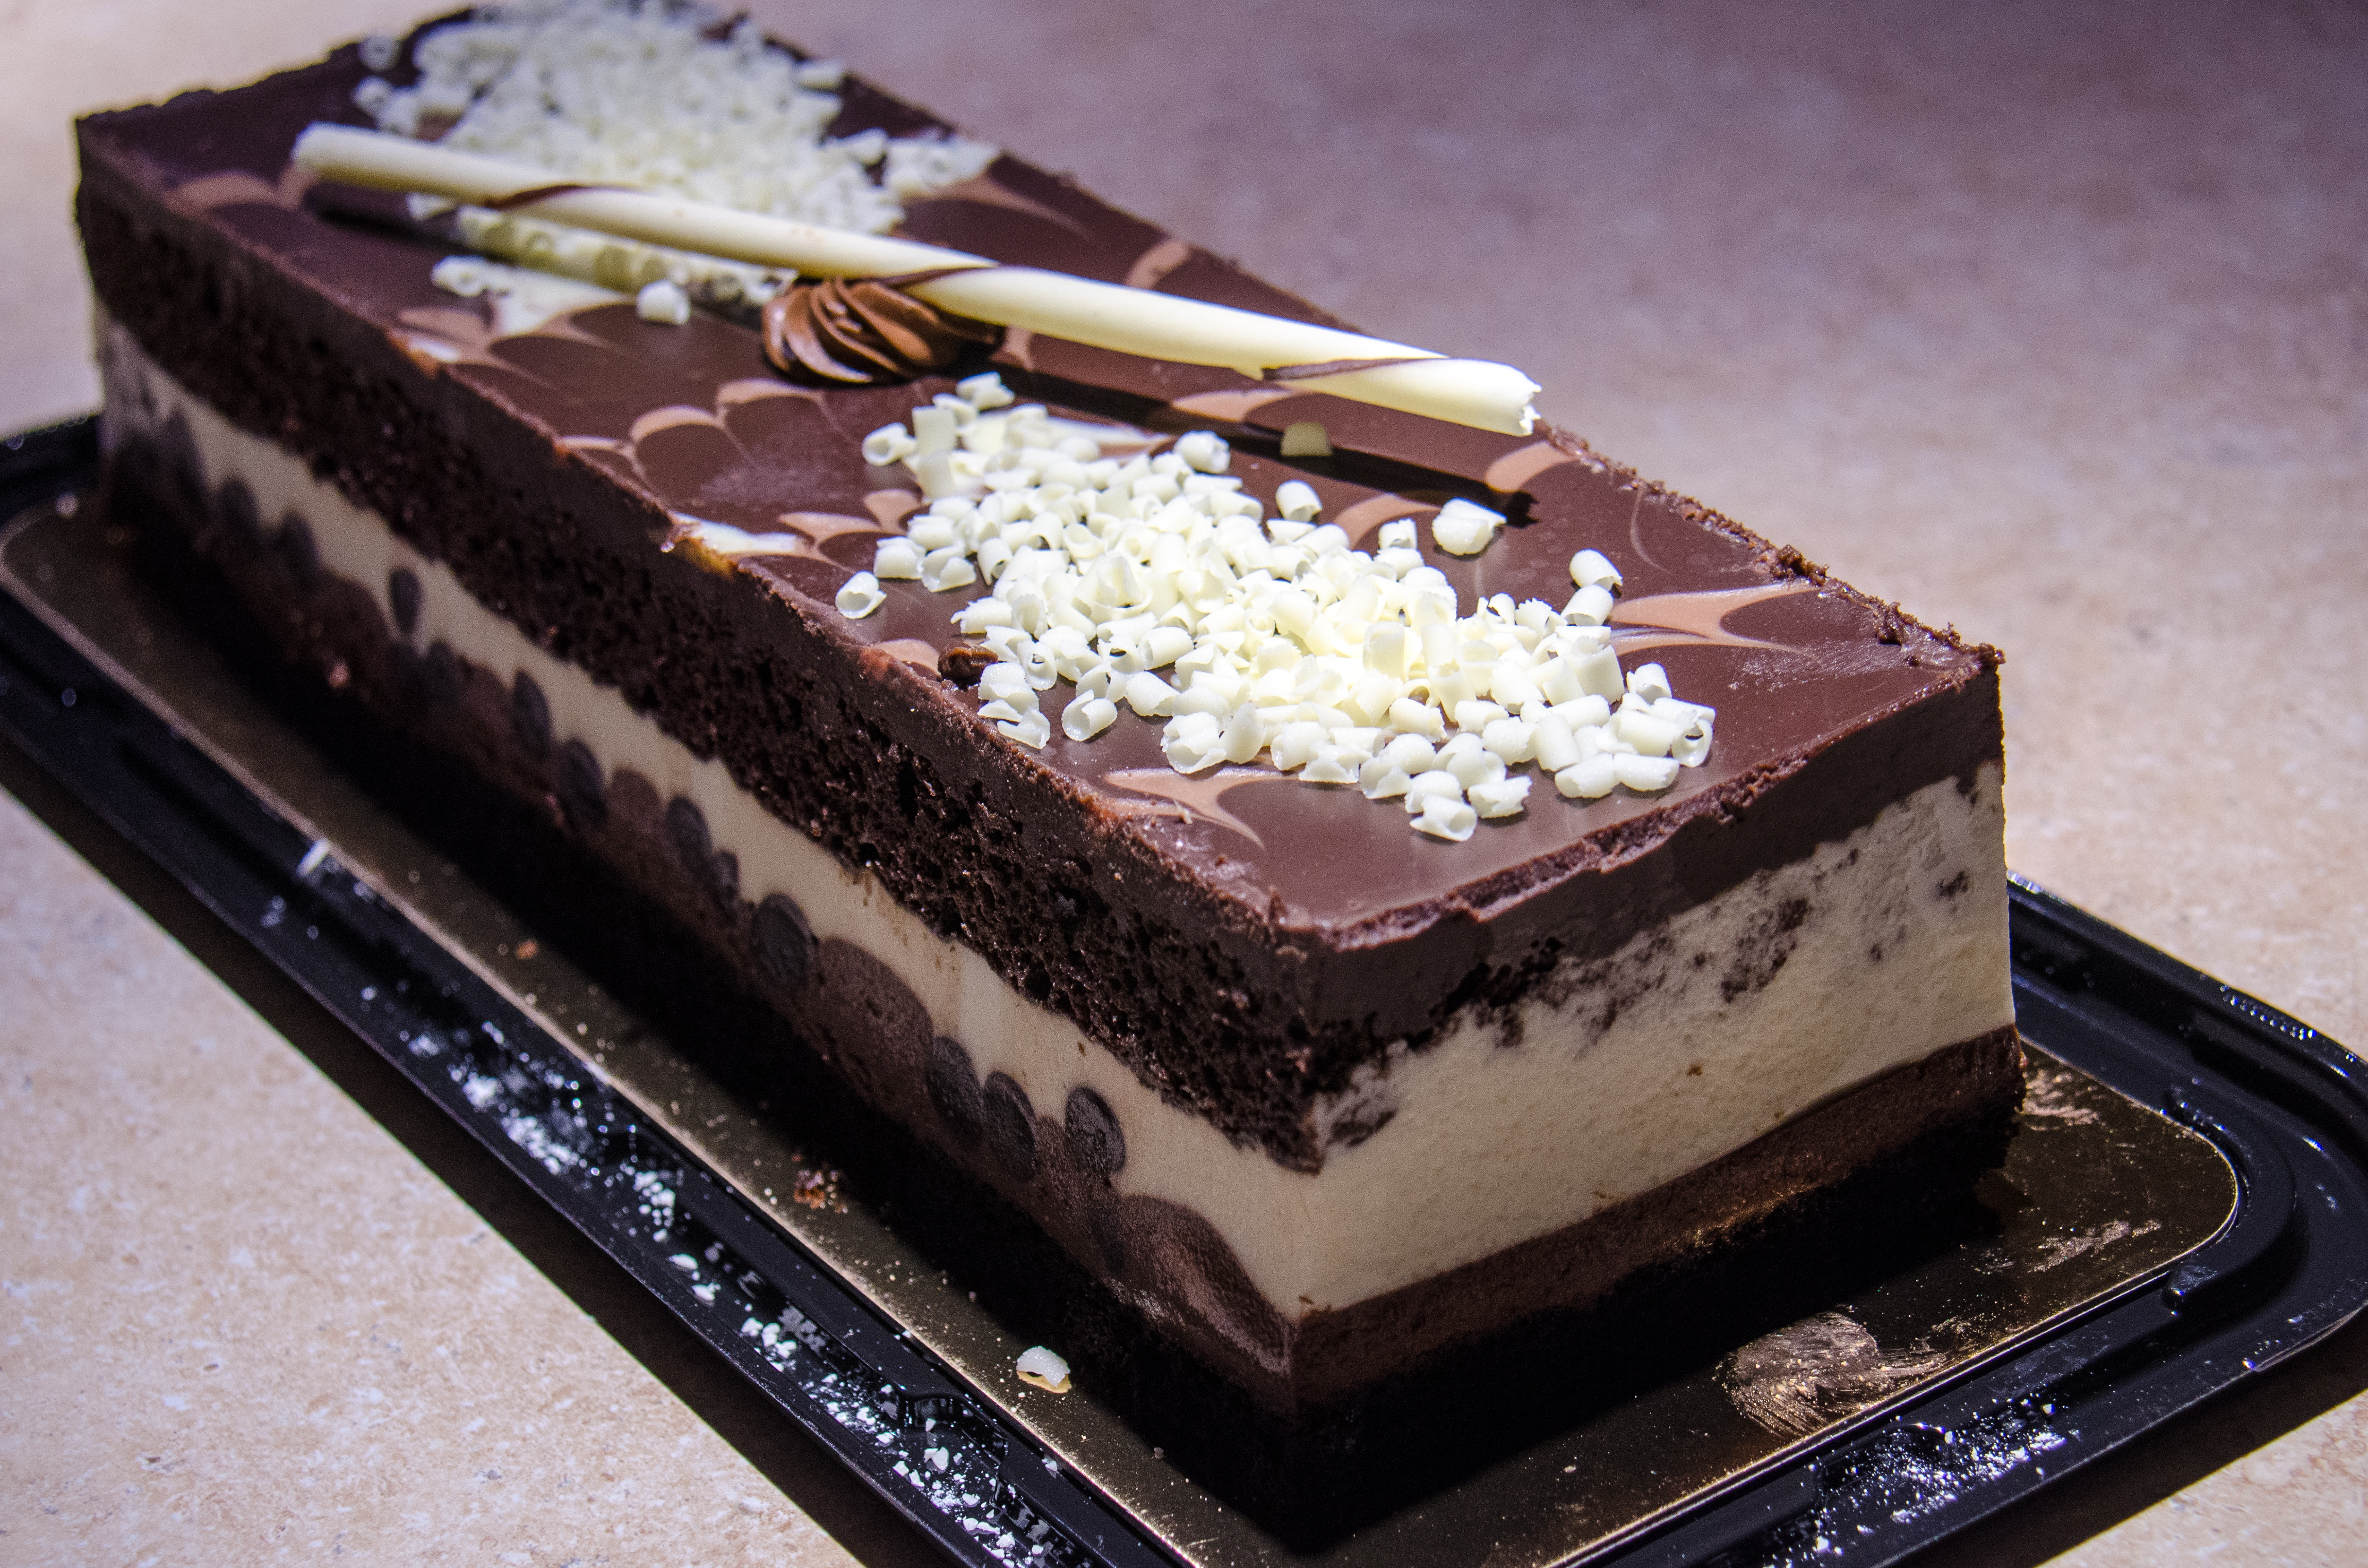 Chocolate Mousse Cake from Costco | Flickr - Photo Sharing!